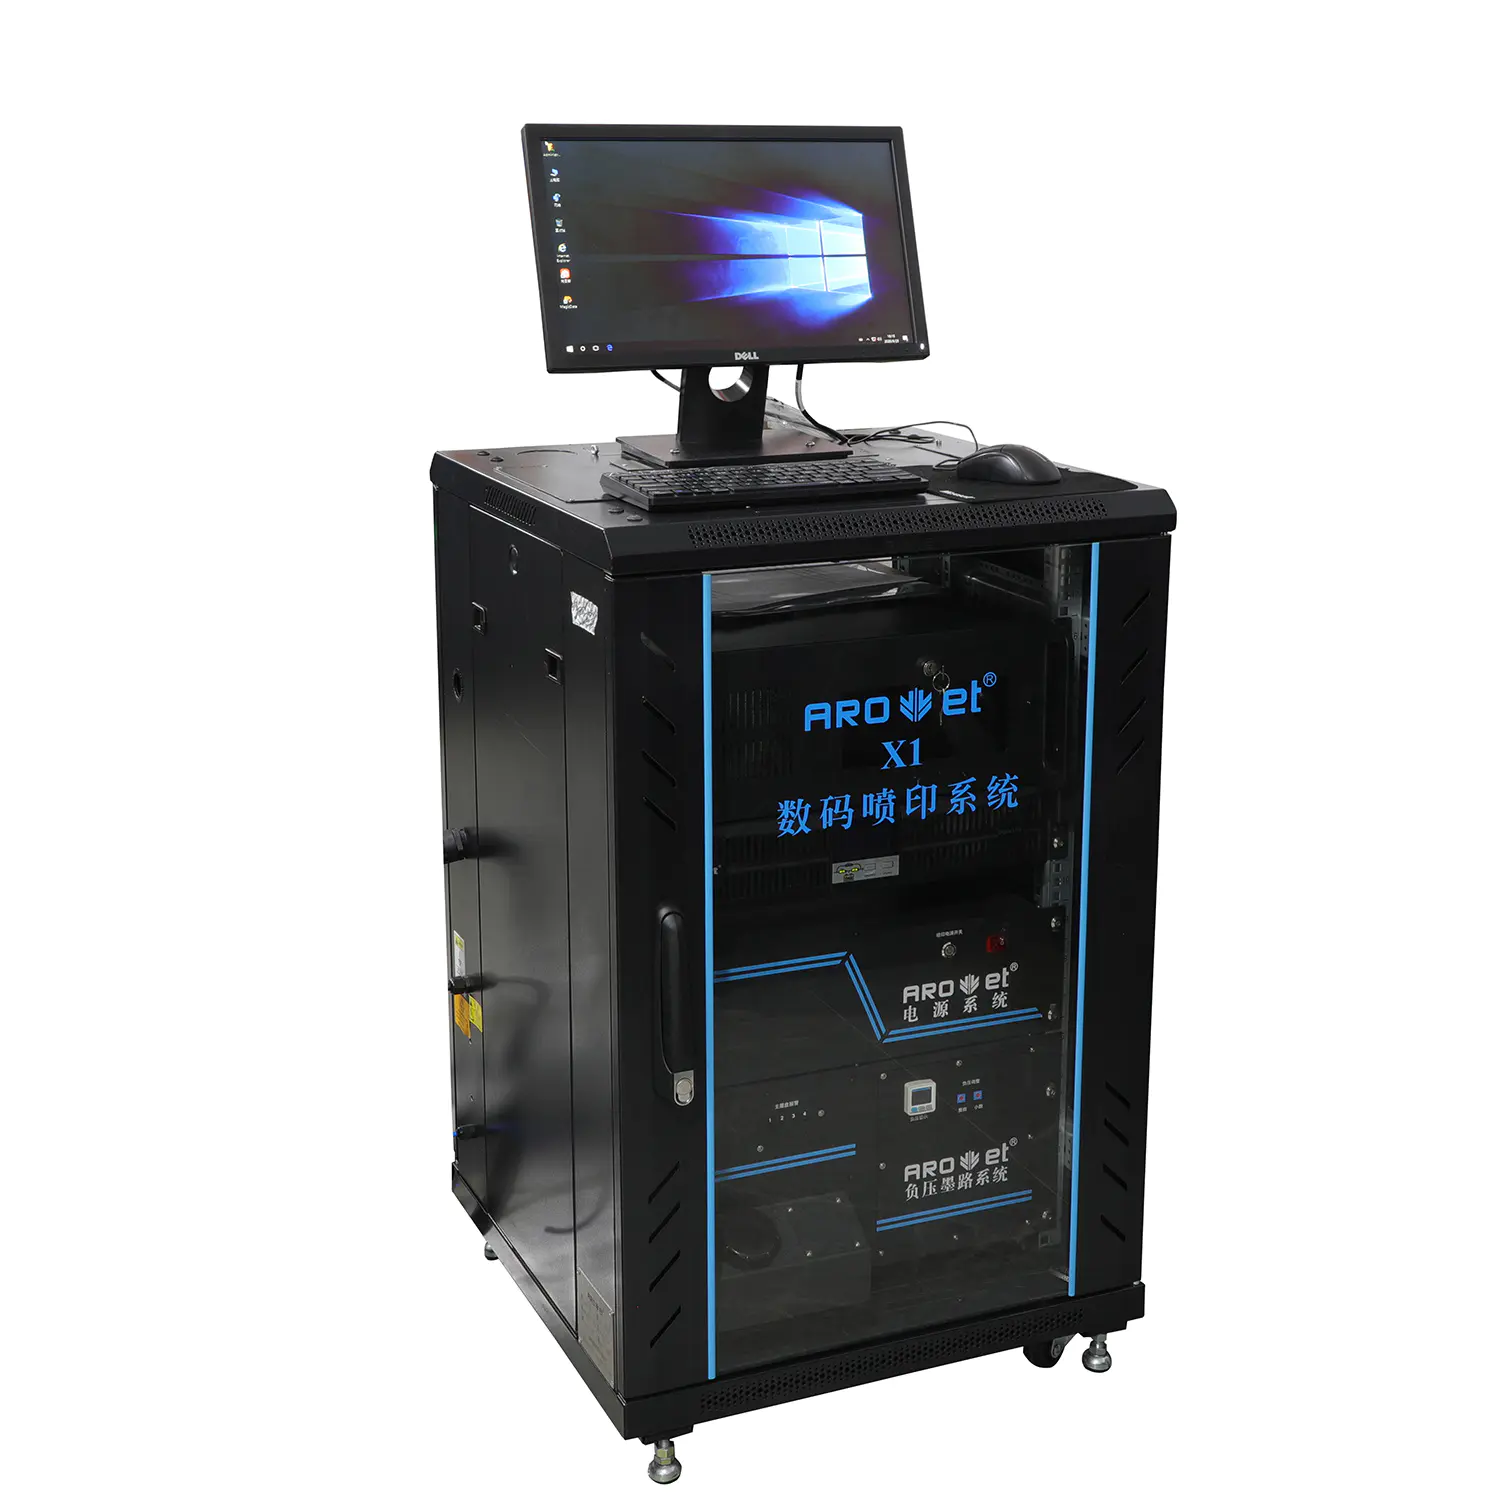 UV Curing Printing and Camera Inspection Inkjet Printing System